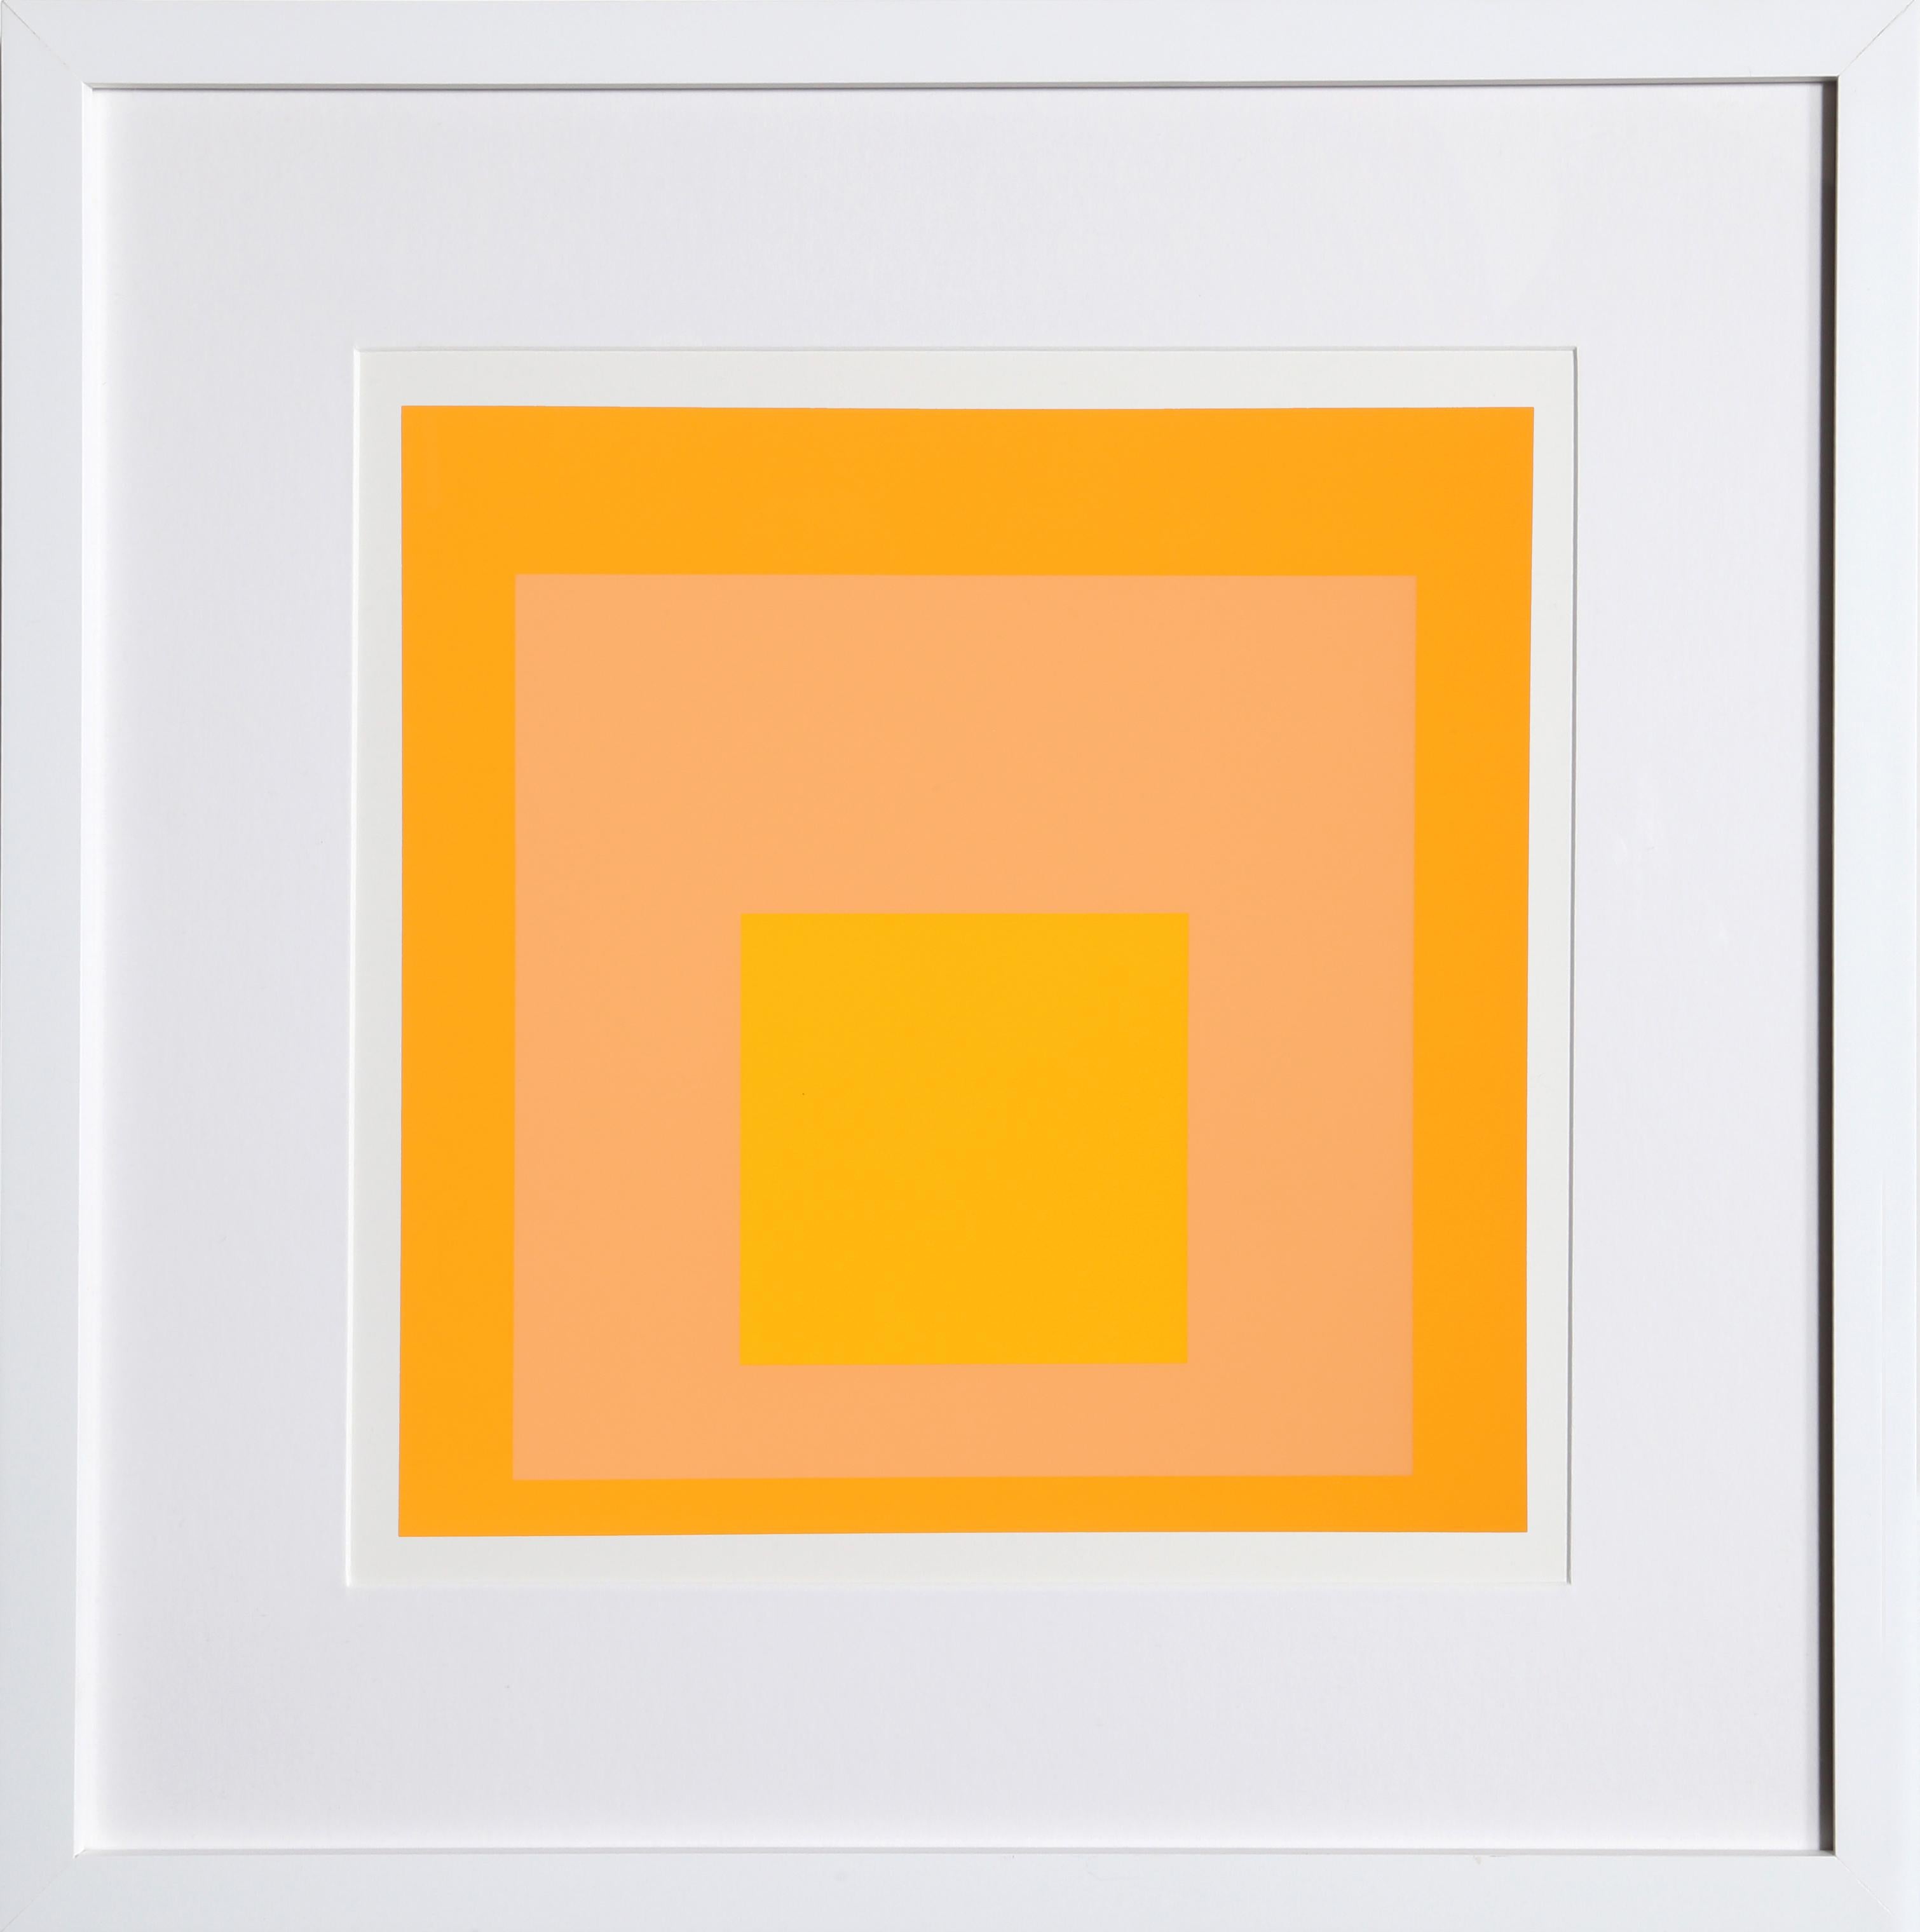 Abstract Print Josef Albers - Hommage au carré - P2, F17, I2